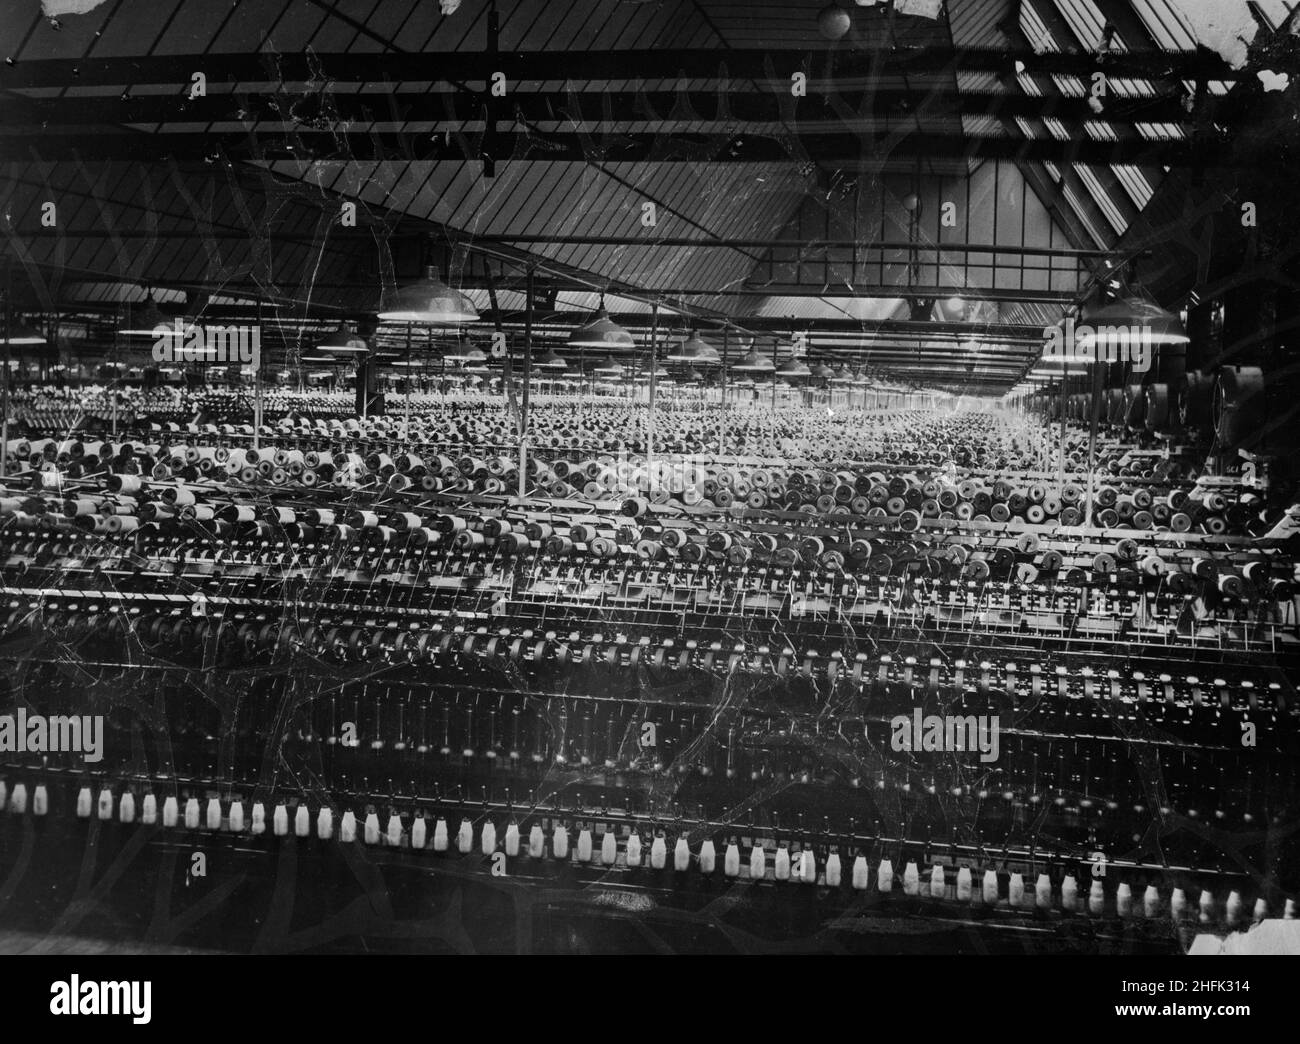 Patons and Baldwins Knitting Factory, Lingfield Close, Darlington, 1947 - 1949. Rows of spinning machinery in the spinning shed at Patons and Baldwins knitting factory. This is a copy negative that appears to have been made by Laing on 28th October 1955. The image was published in the March 1949 issue of Laing's monthly newsletter, Team Spirit. At the time of publication, two thirds of the work at the site had been completed and a small portion of the factory had already been in use for over a year. Stock Photo